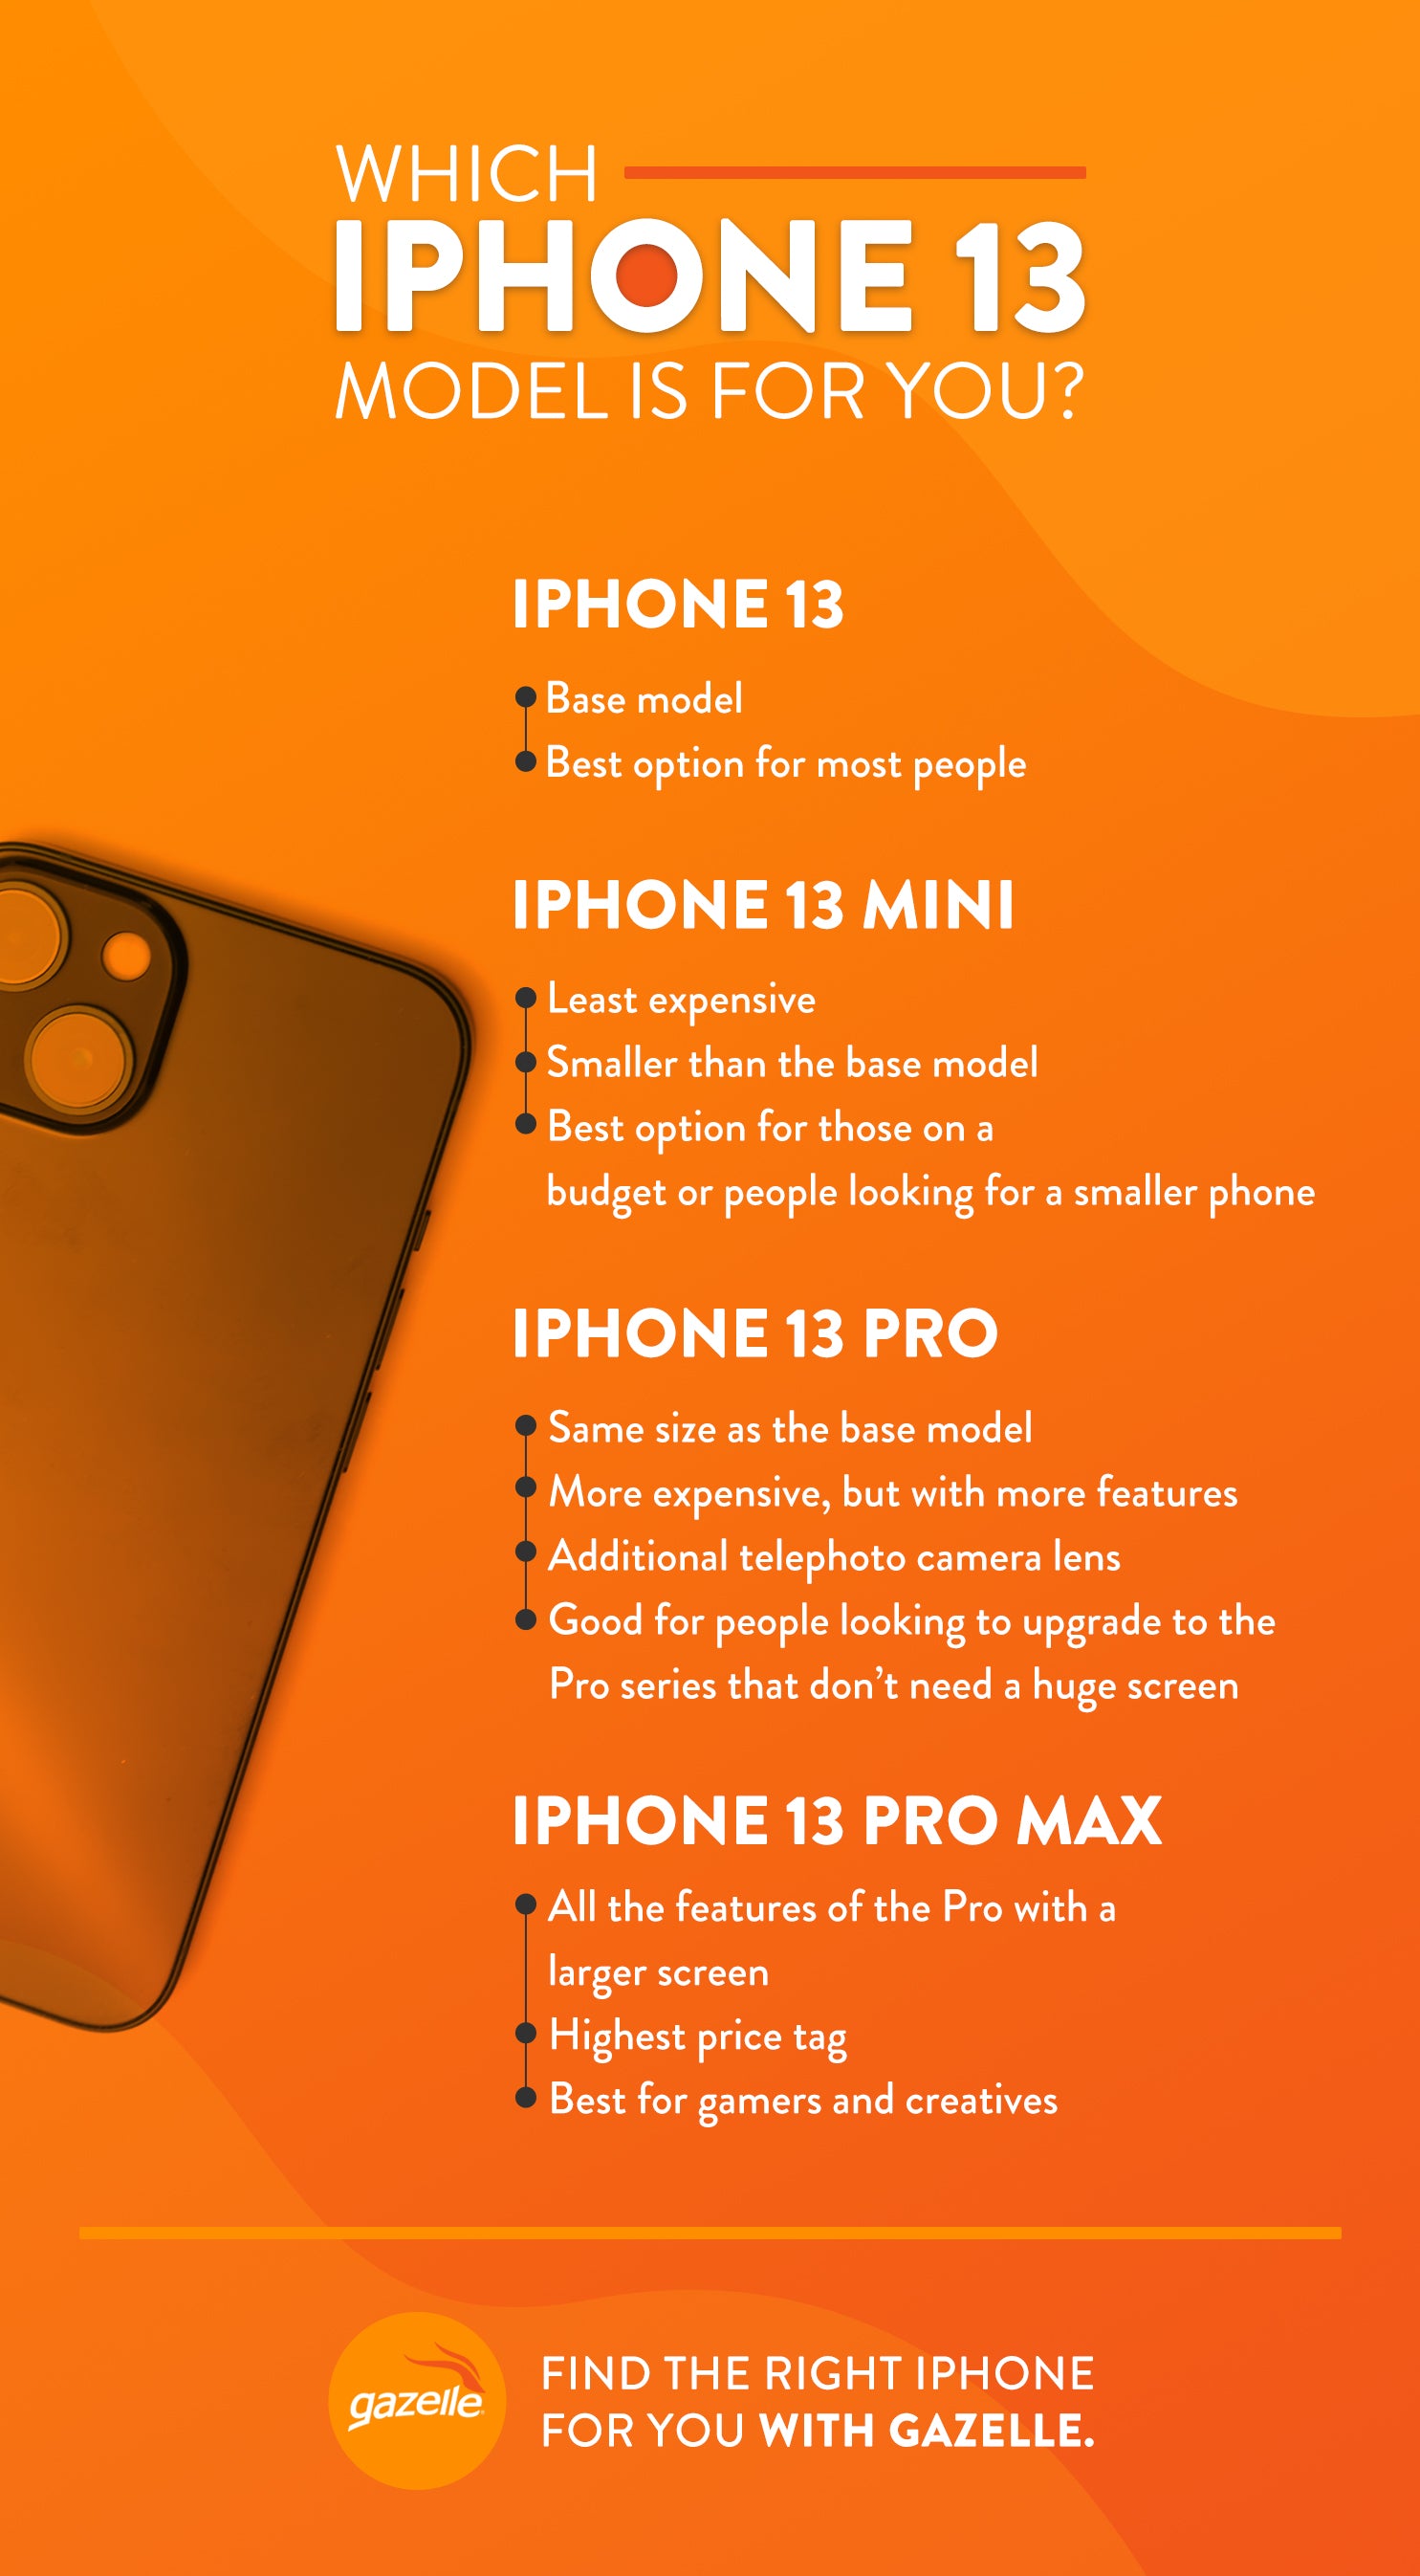 5 things we like about the iPhone 13 Pro Max